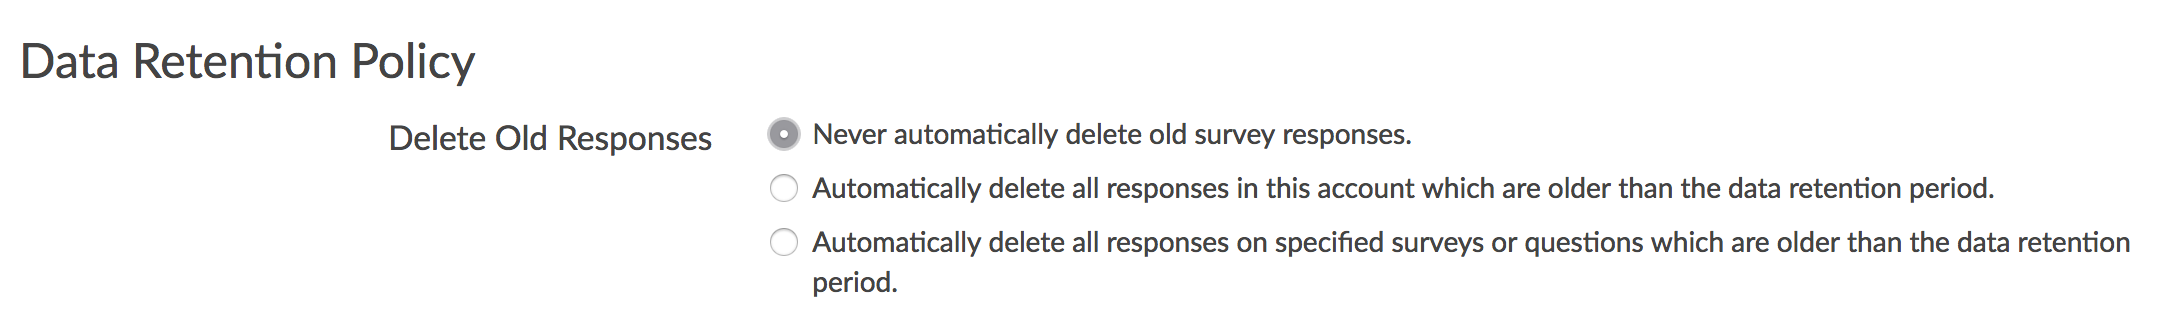 DRP Default: Never automatically delete old survey responses